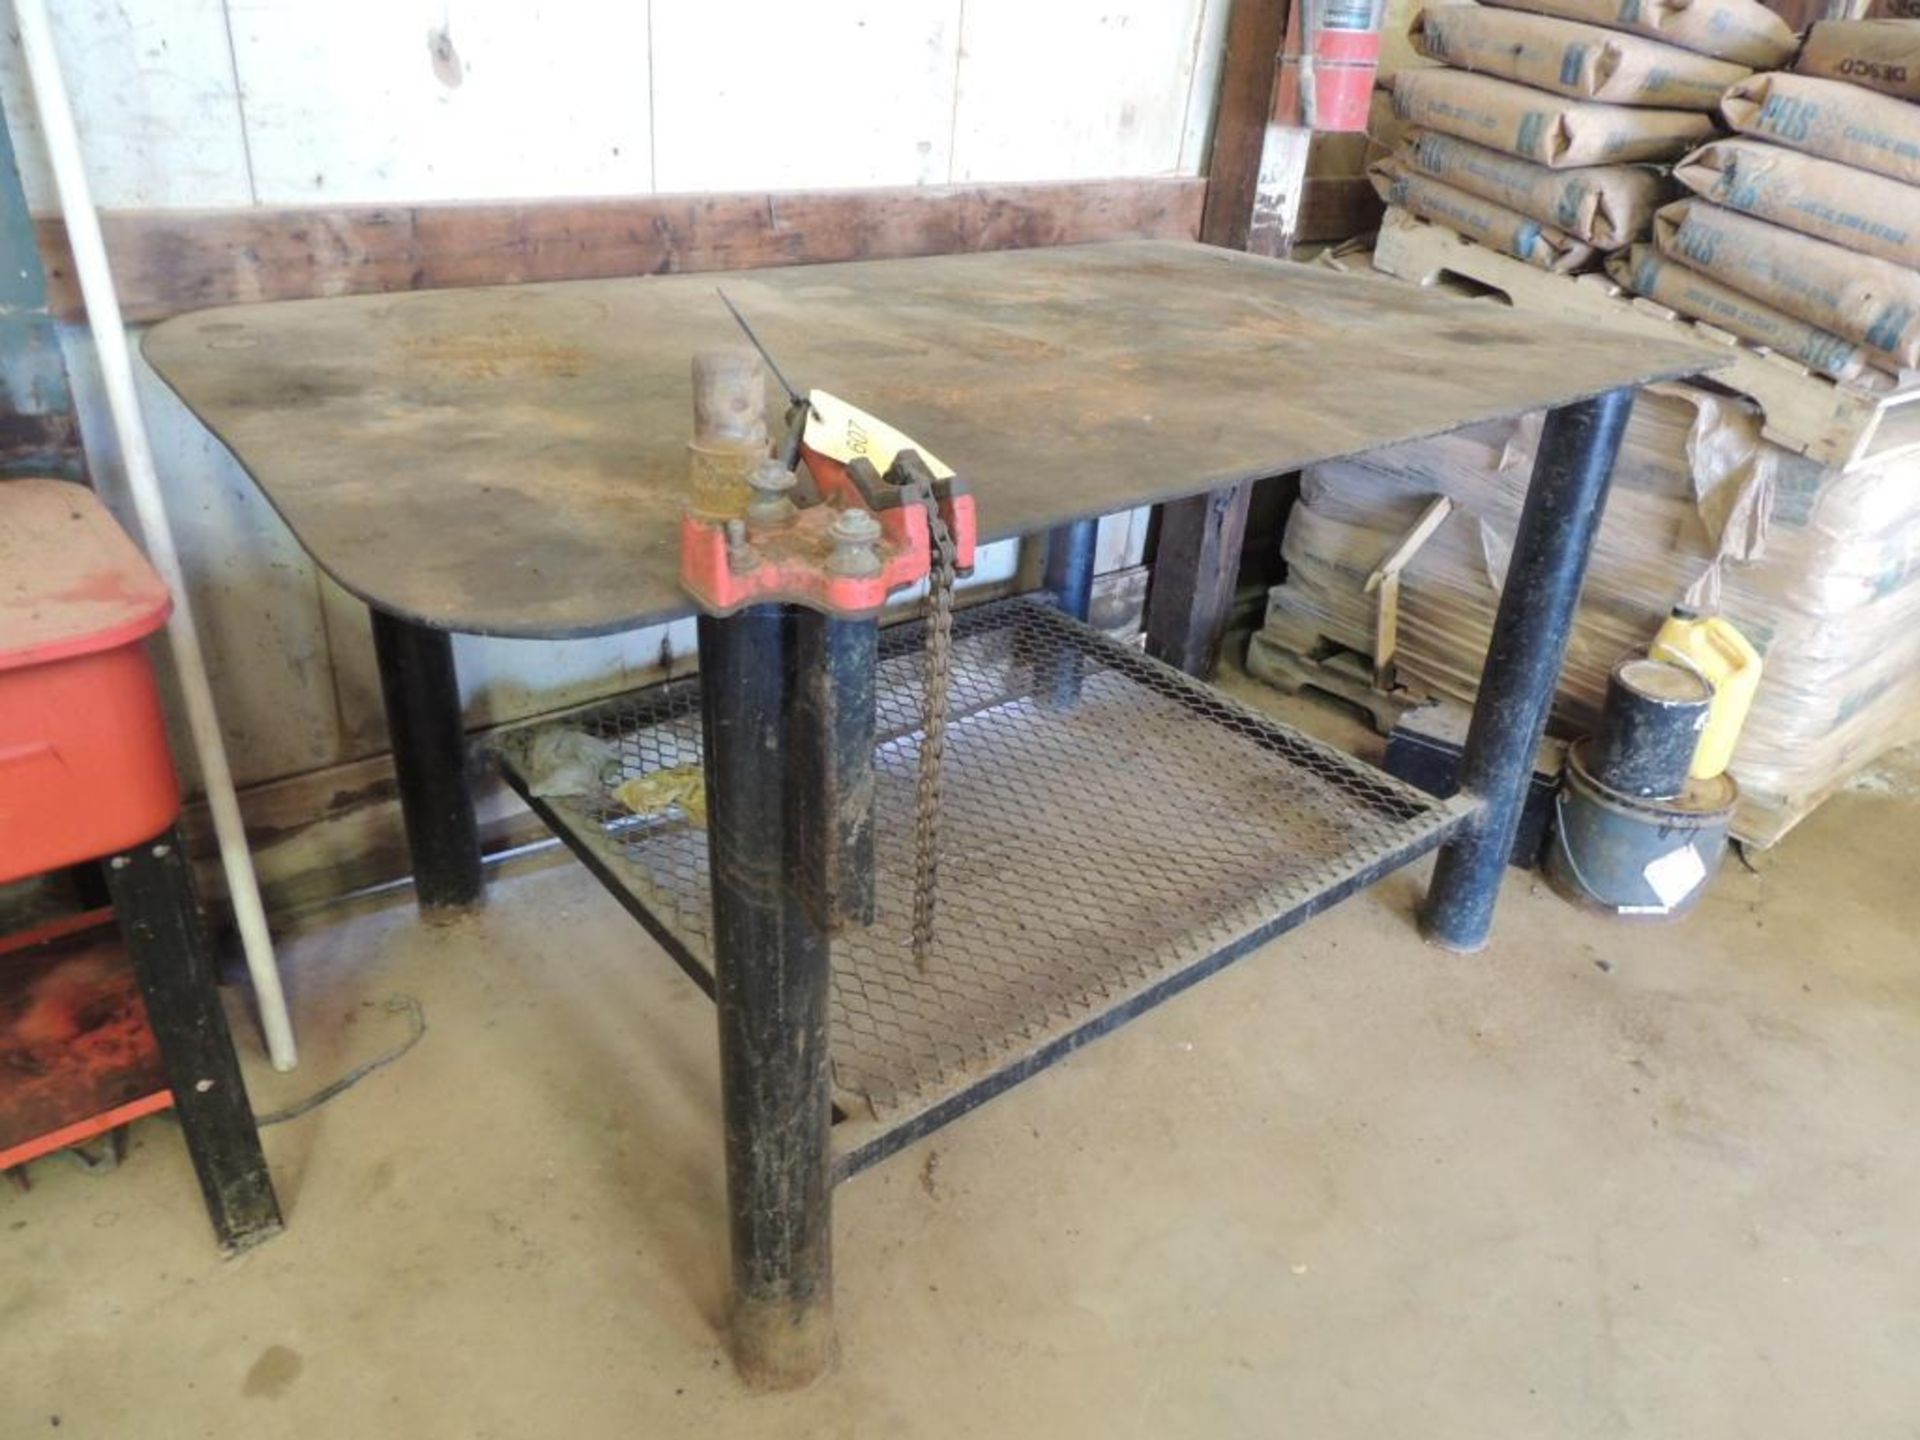 LOT: 49 in. x 80 in. Welding Bench with Ridgid Top Screw Chain Vise (LOCATED IN HENNESSEY, OK. -